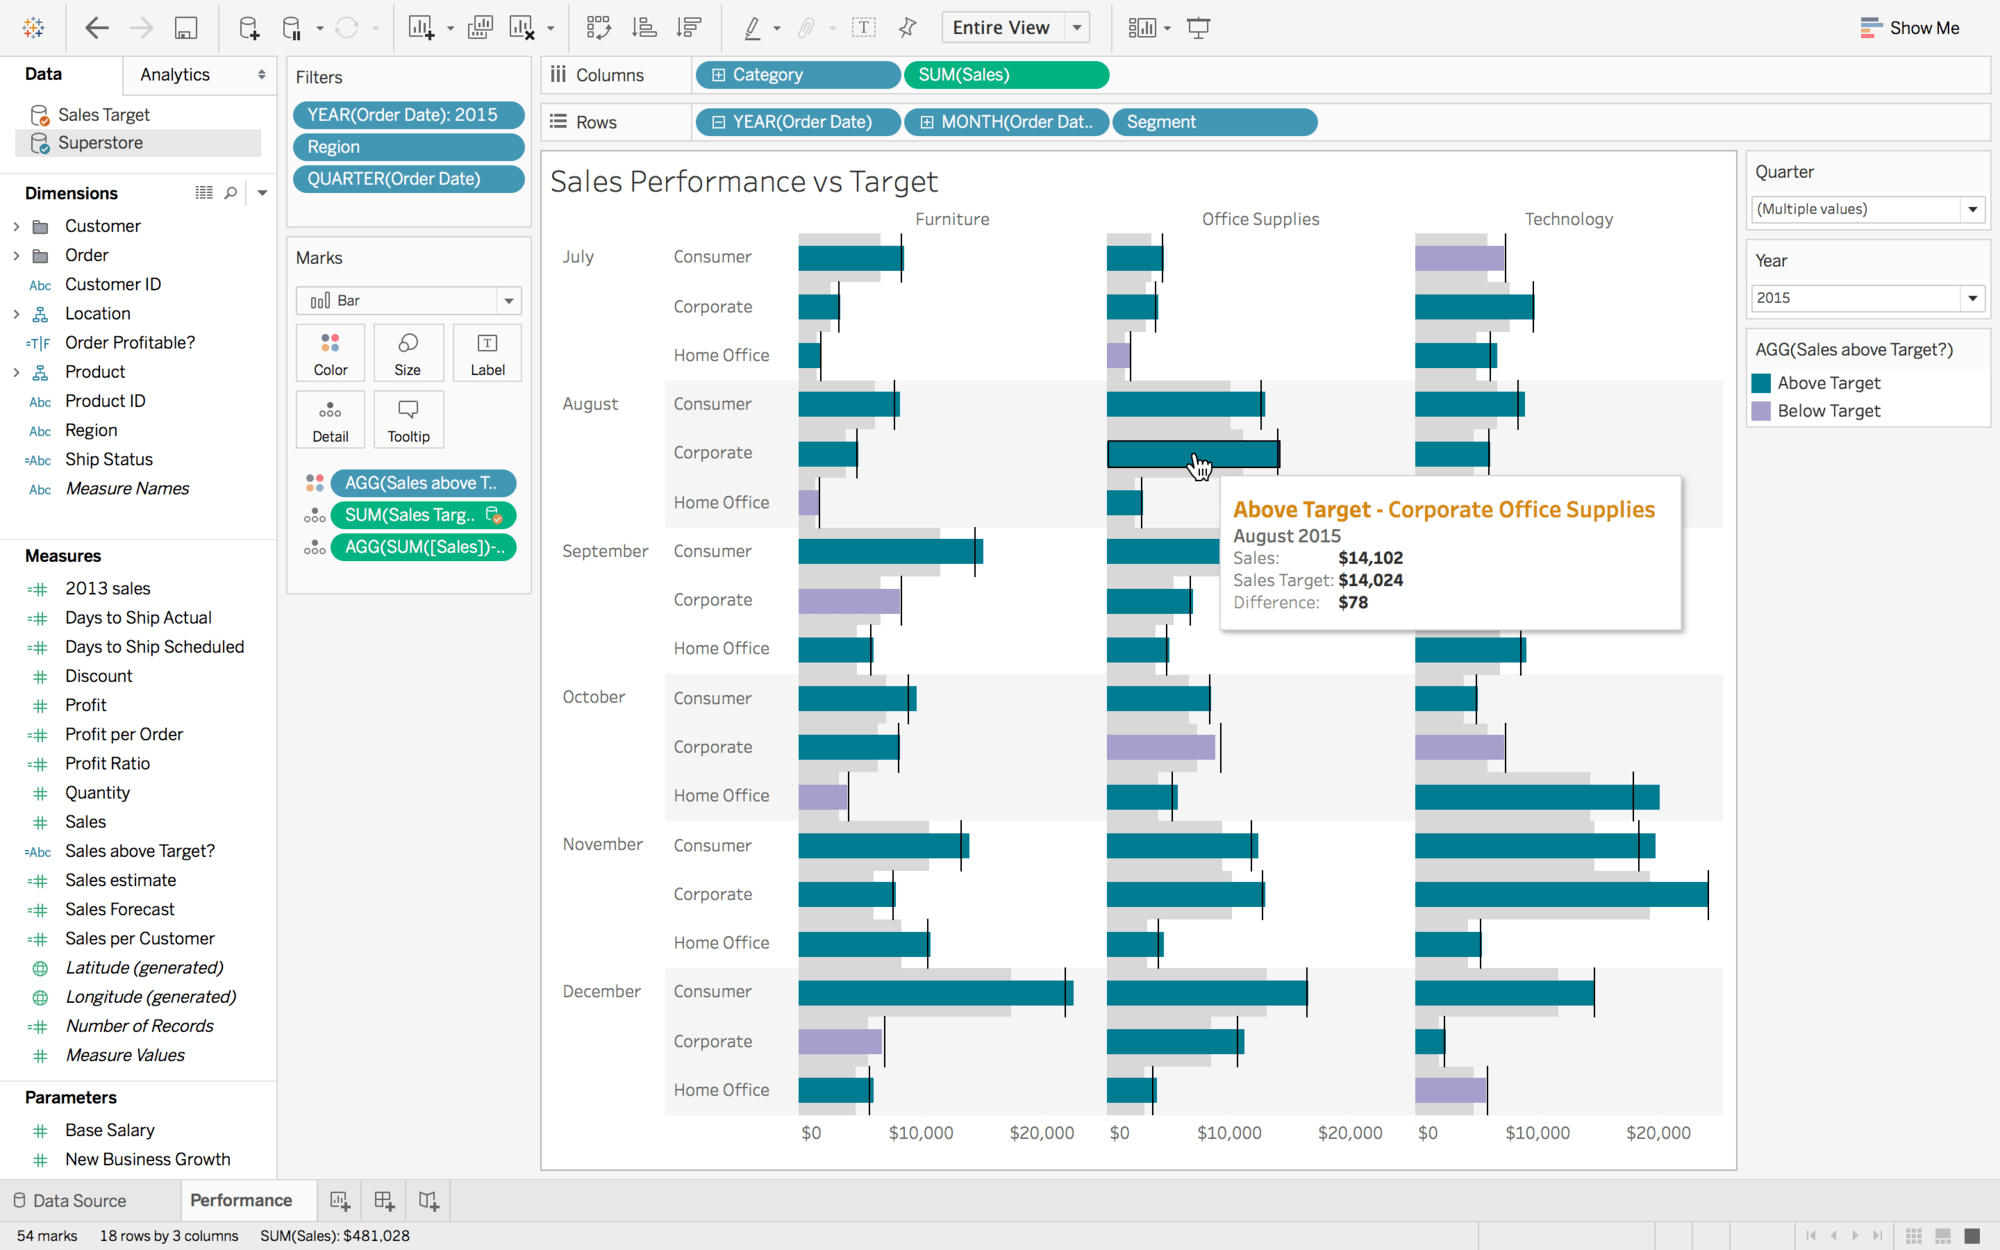 Excel Spreadsheet In Italiano Intended For Excel Spreadsheets: Data Analysis Made More ...